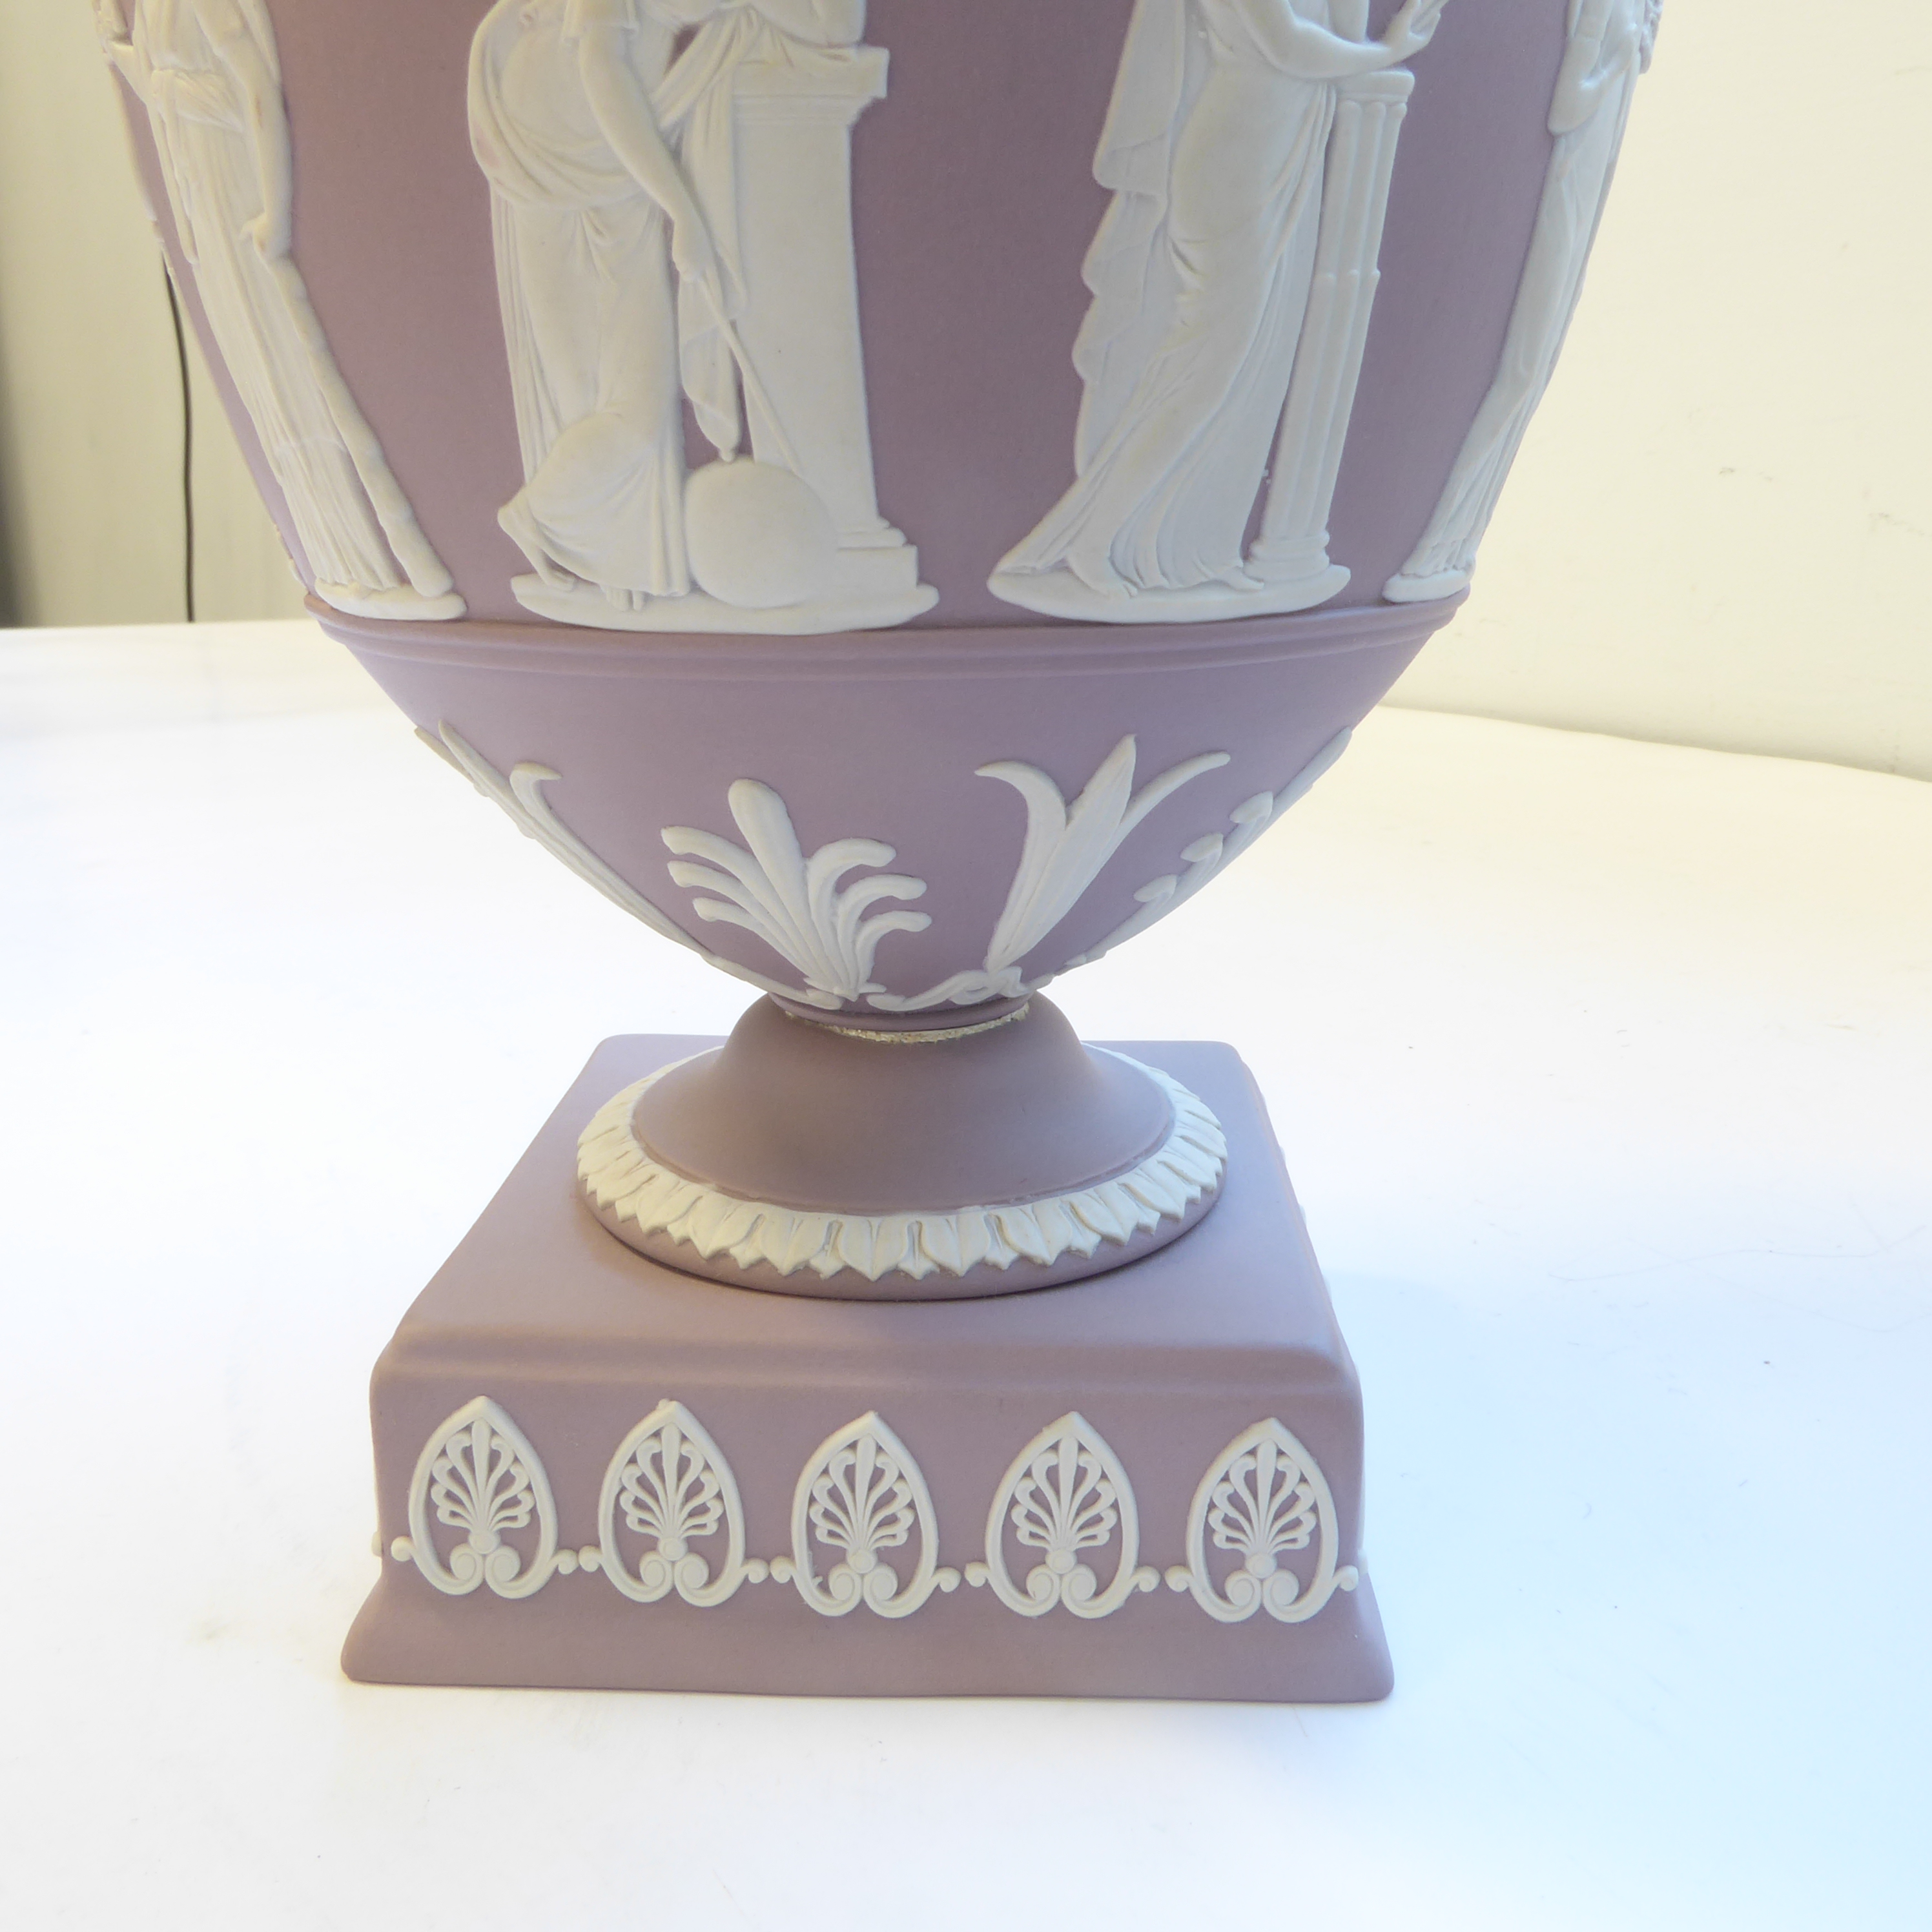 Various 19th / early 20th century Wedgwood Jasperware in typical neo-classical style with applied - Image 16 of 24